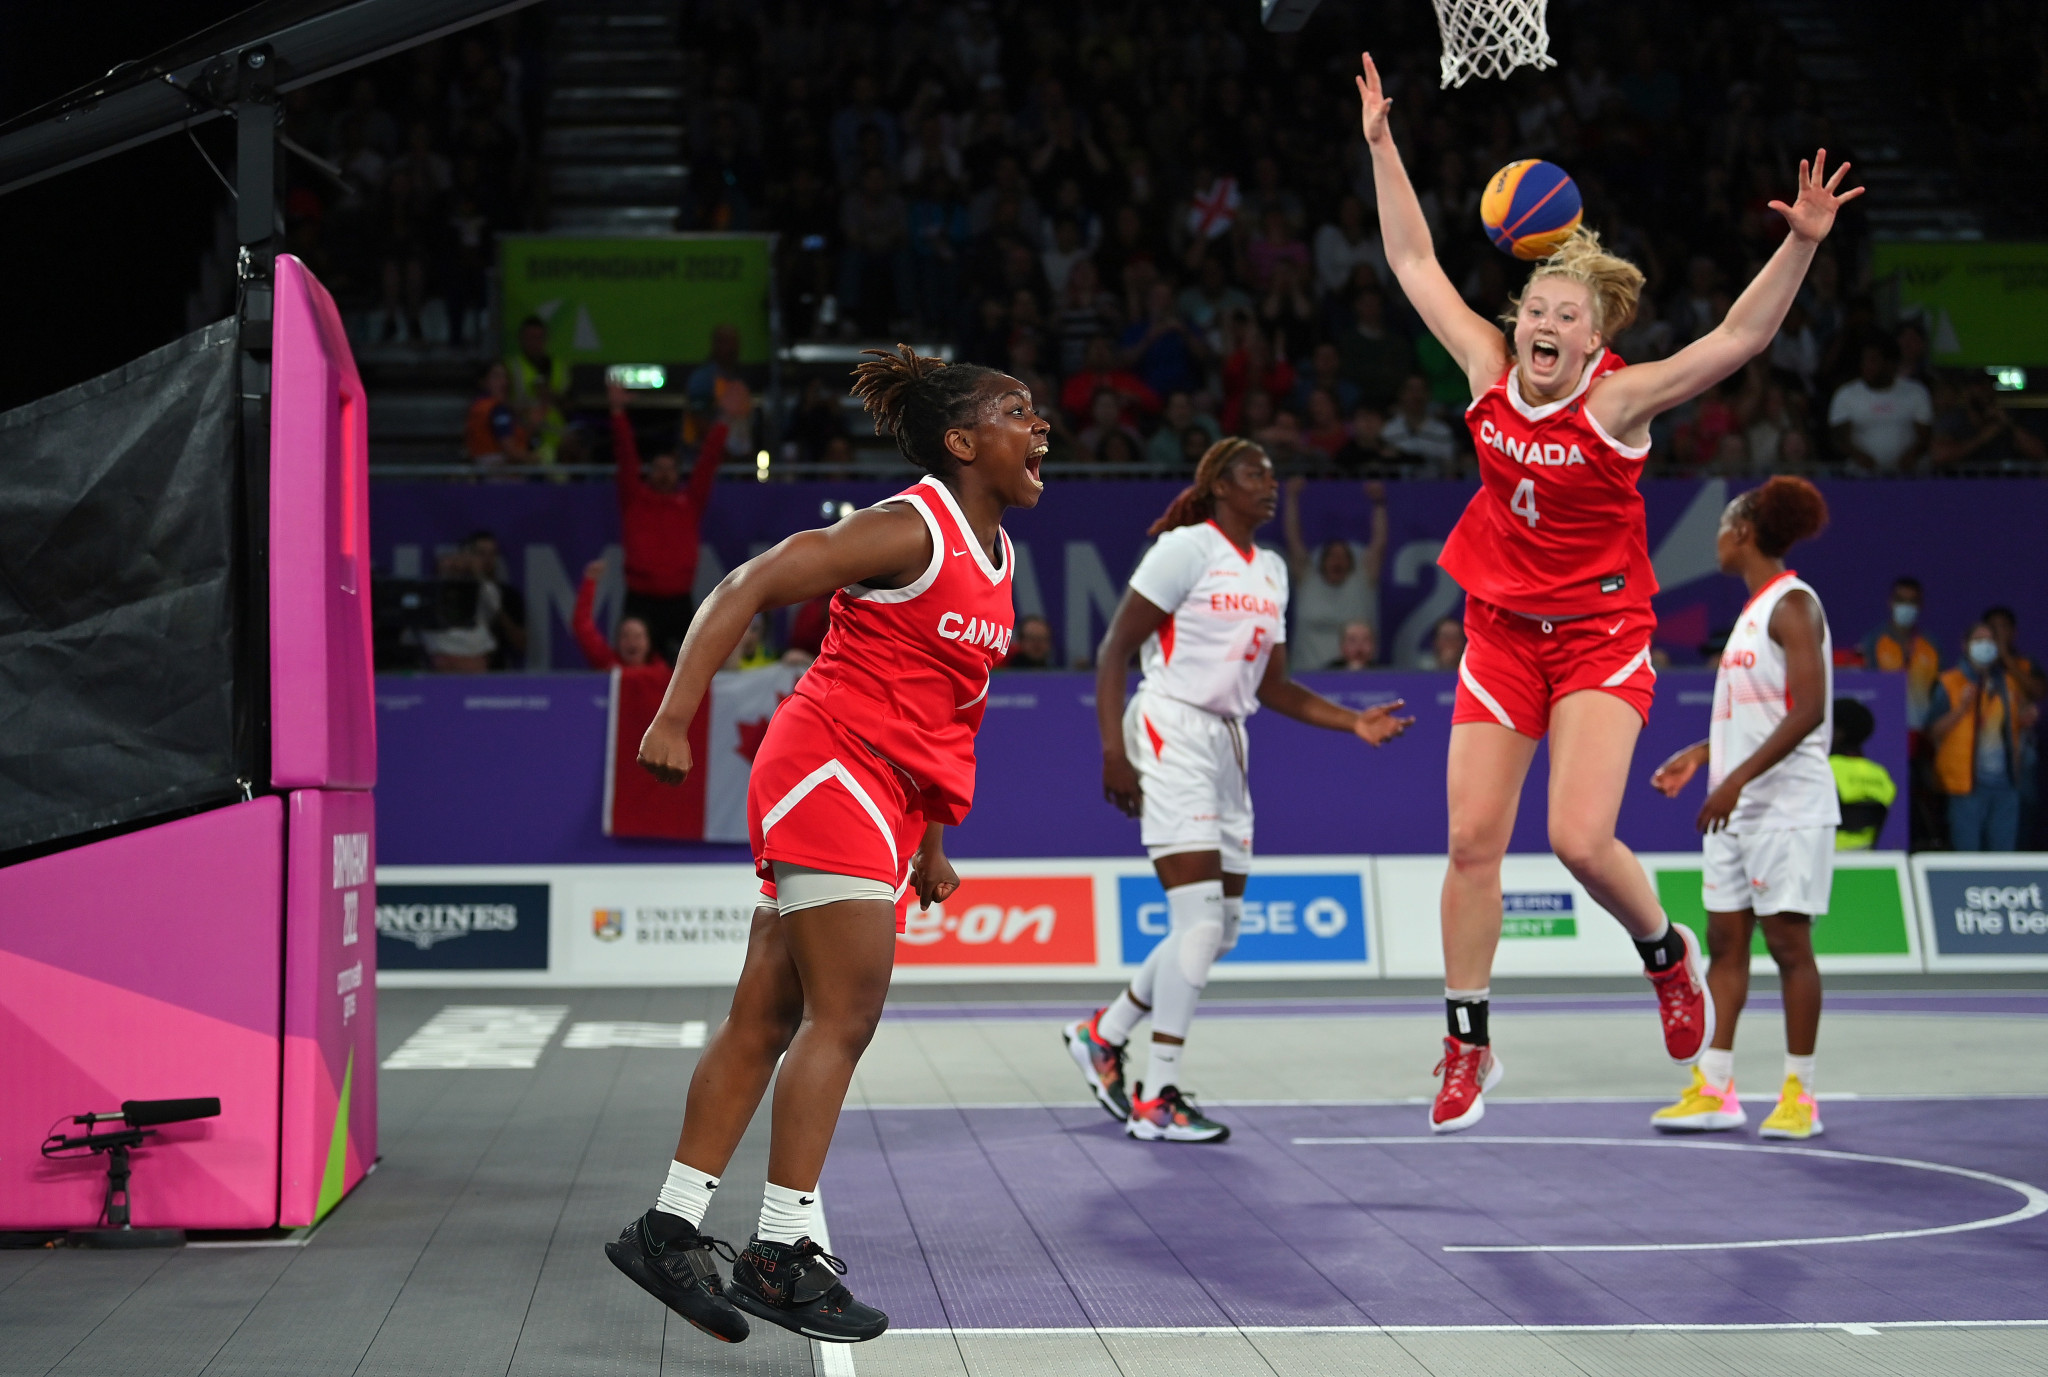 Canada celebrate after a buzzer-beater helped them edge England to win women's 3x3 basketball gold ©Getty Images